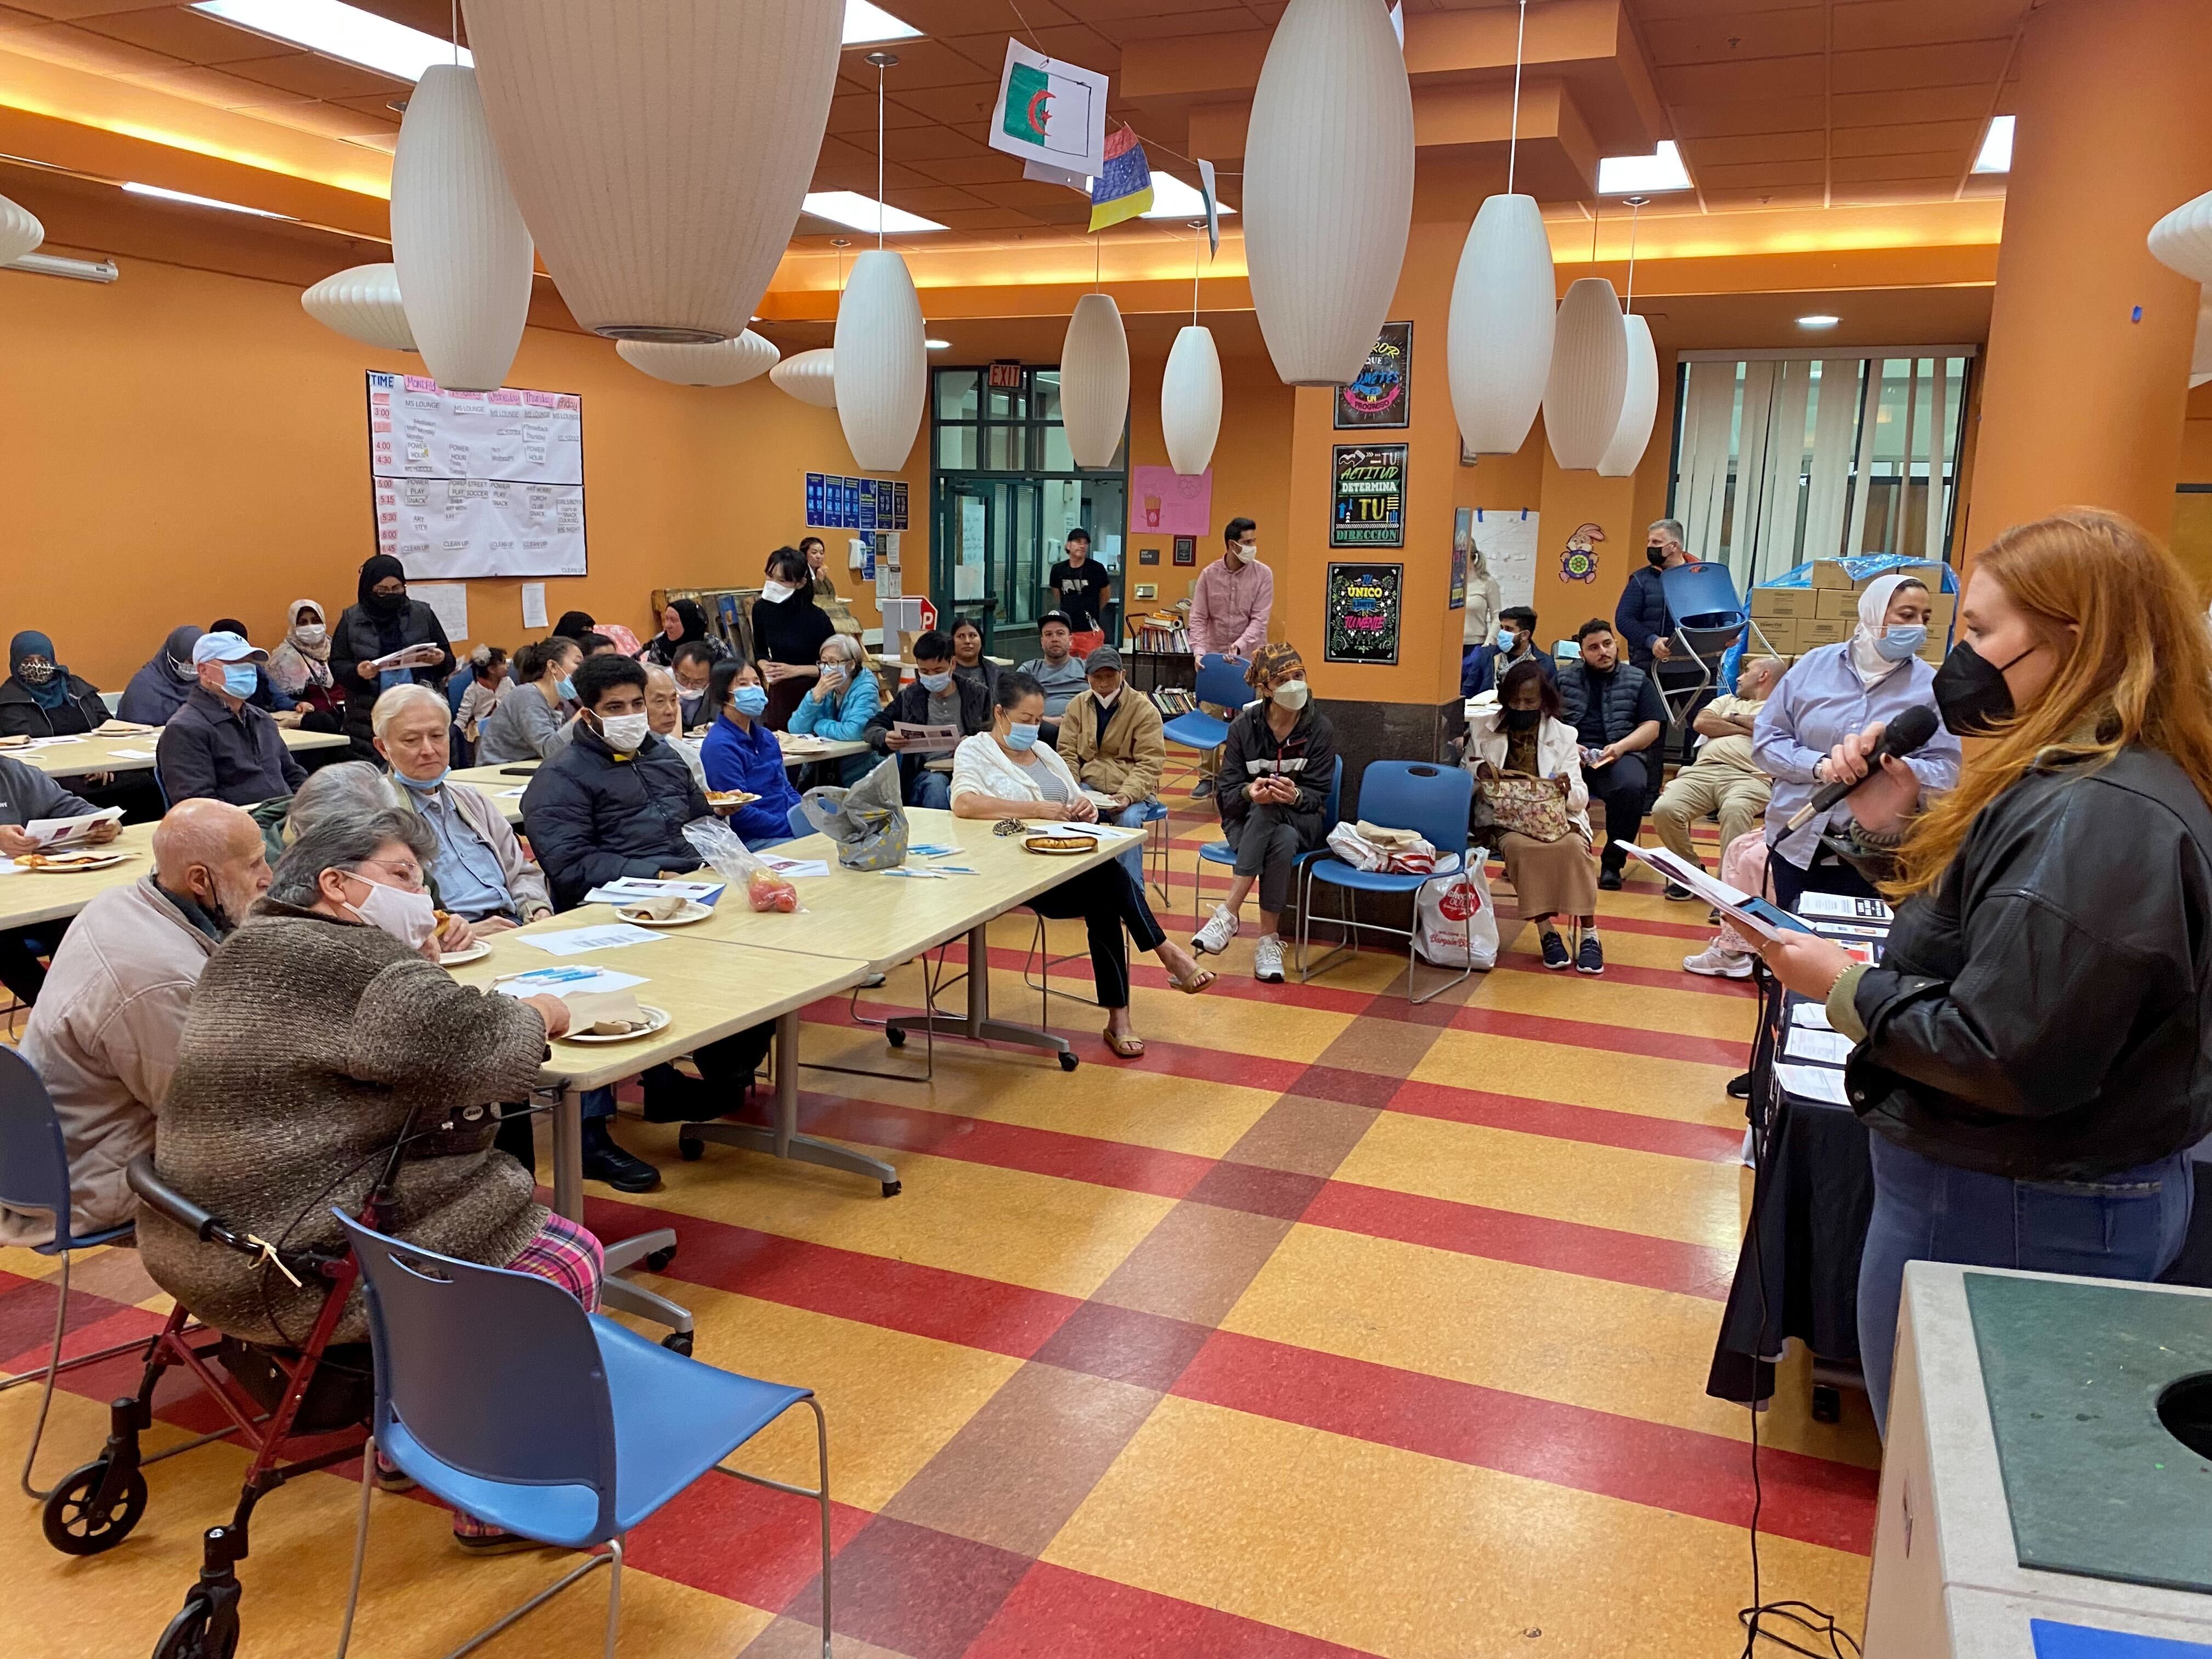 Asian Law Caucus staff member talking on a mic to a room of people sitting at tables at the Chinatown Community Development Center.